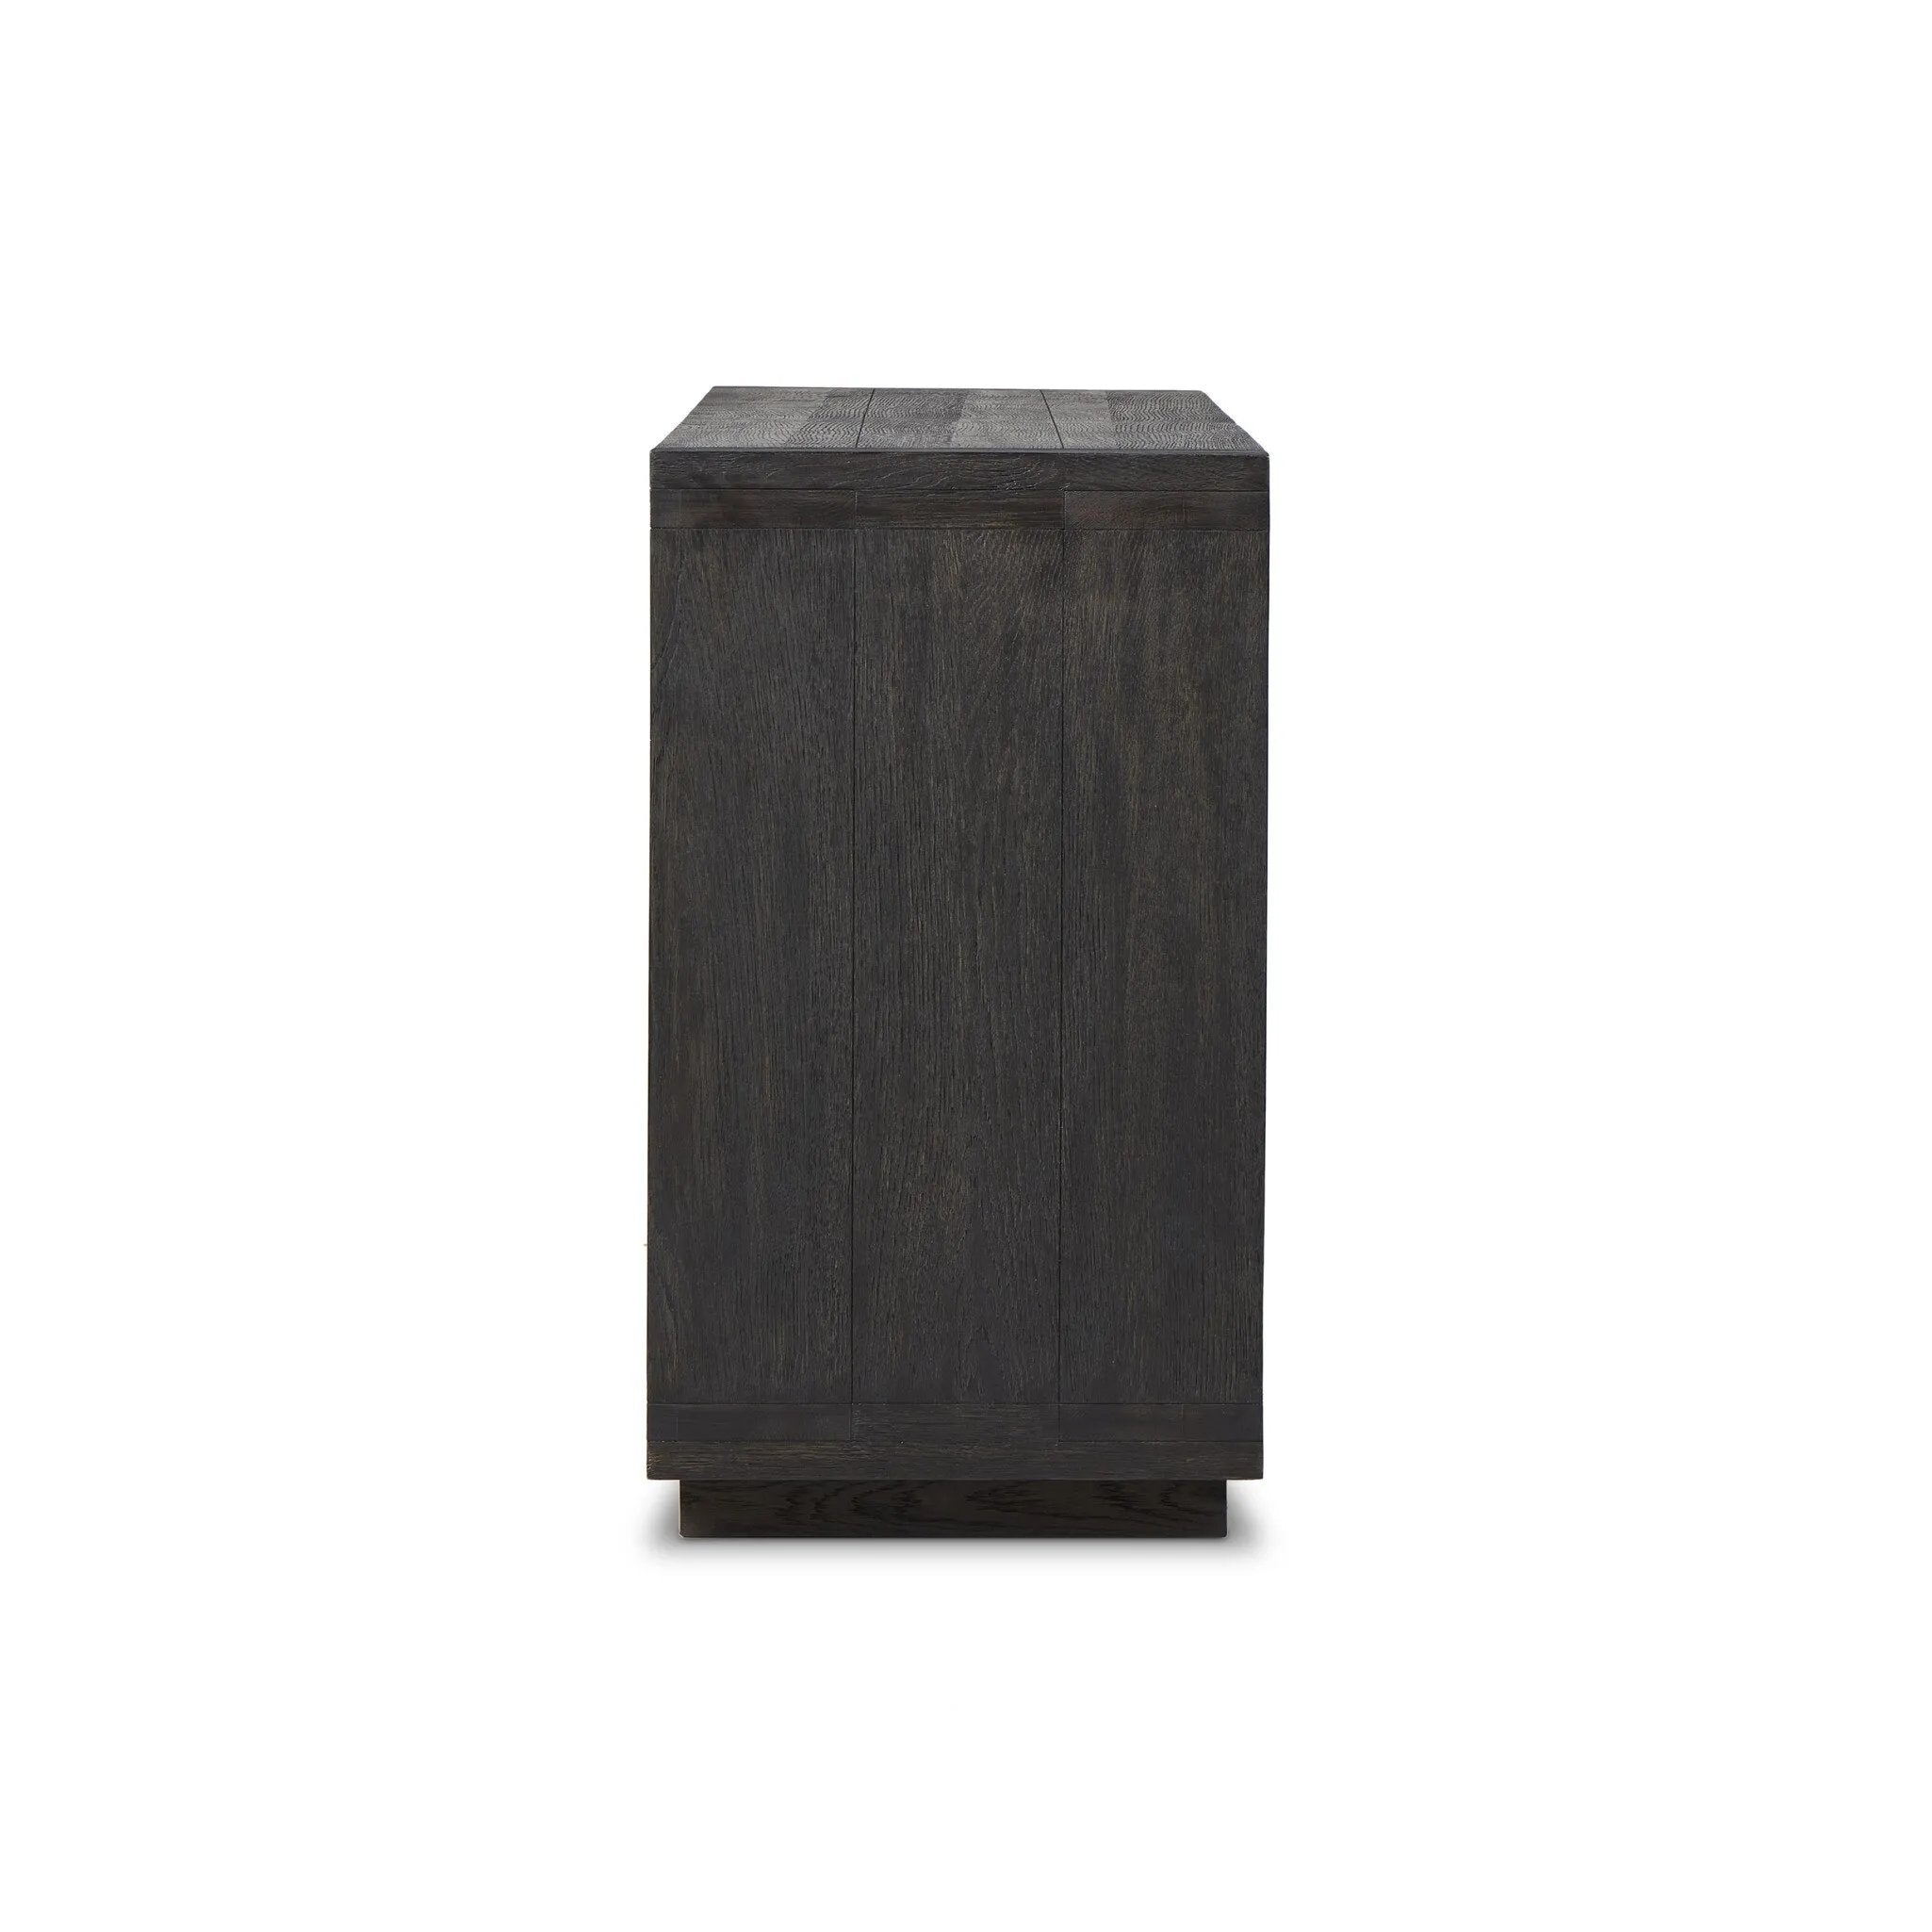 Black-finished oak shapes a streamlined box-style dresser, with lap joint corners for a detail-driven touch.Collection: Bennet Amethyst Home provides interior design, new home construction design consulting, vintage area rugs, and lighting in the Portland metro area.